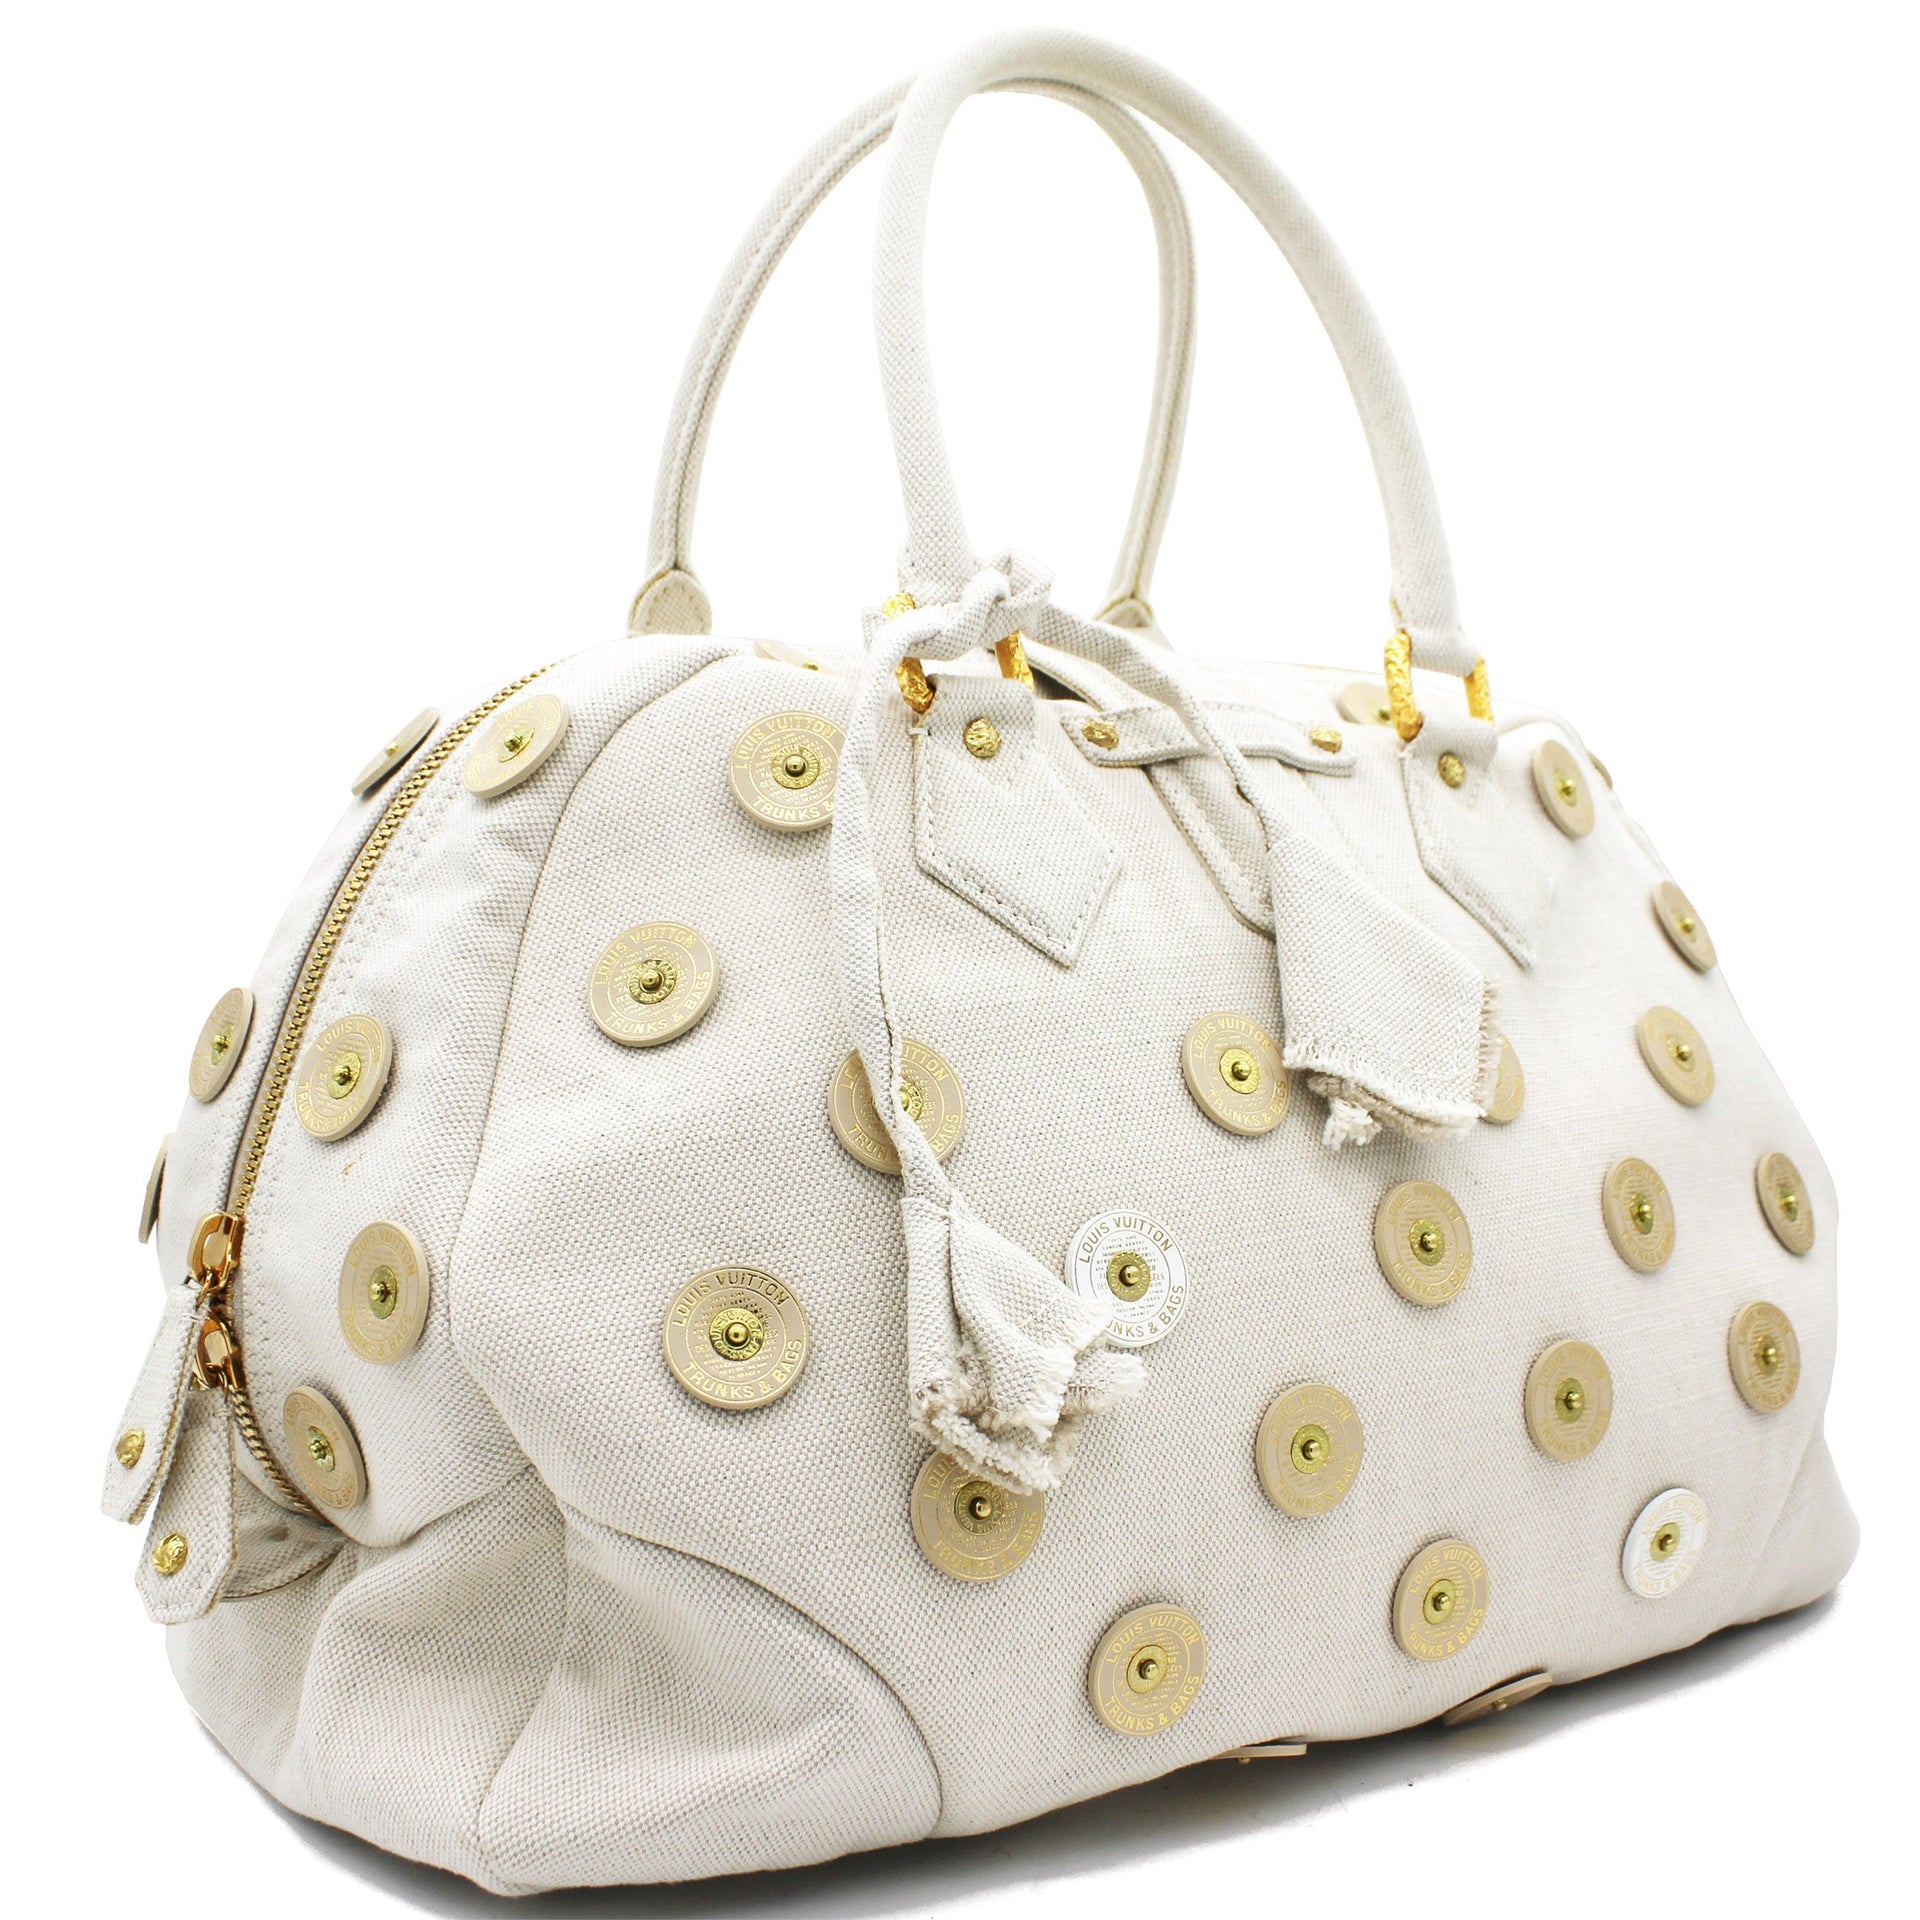 Limited Edition Louis Vuitton Polka Dots Fleur Tinkerbell Bag at